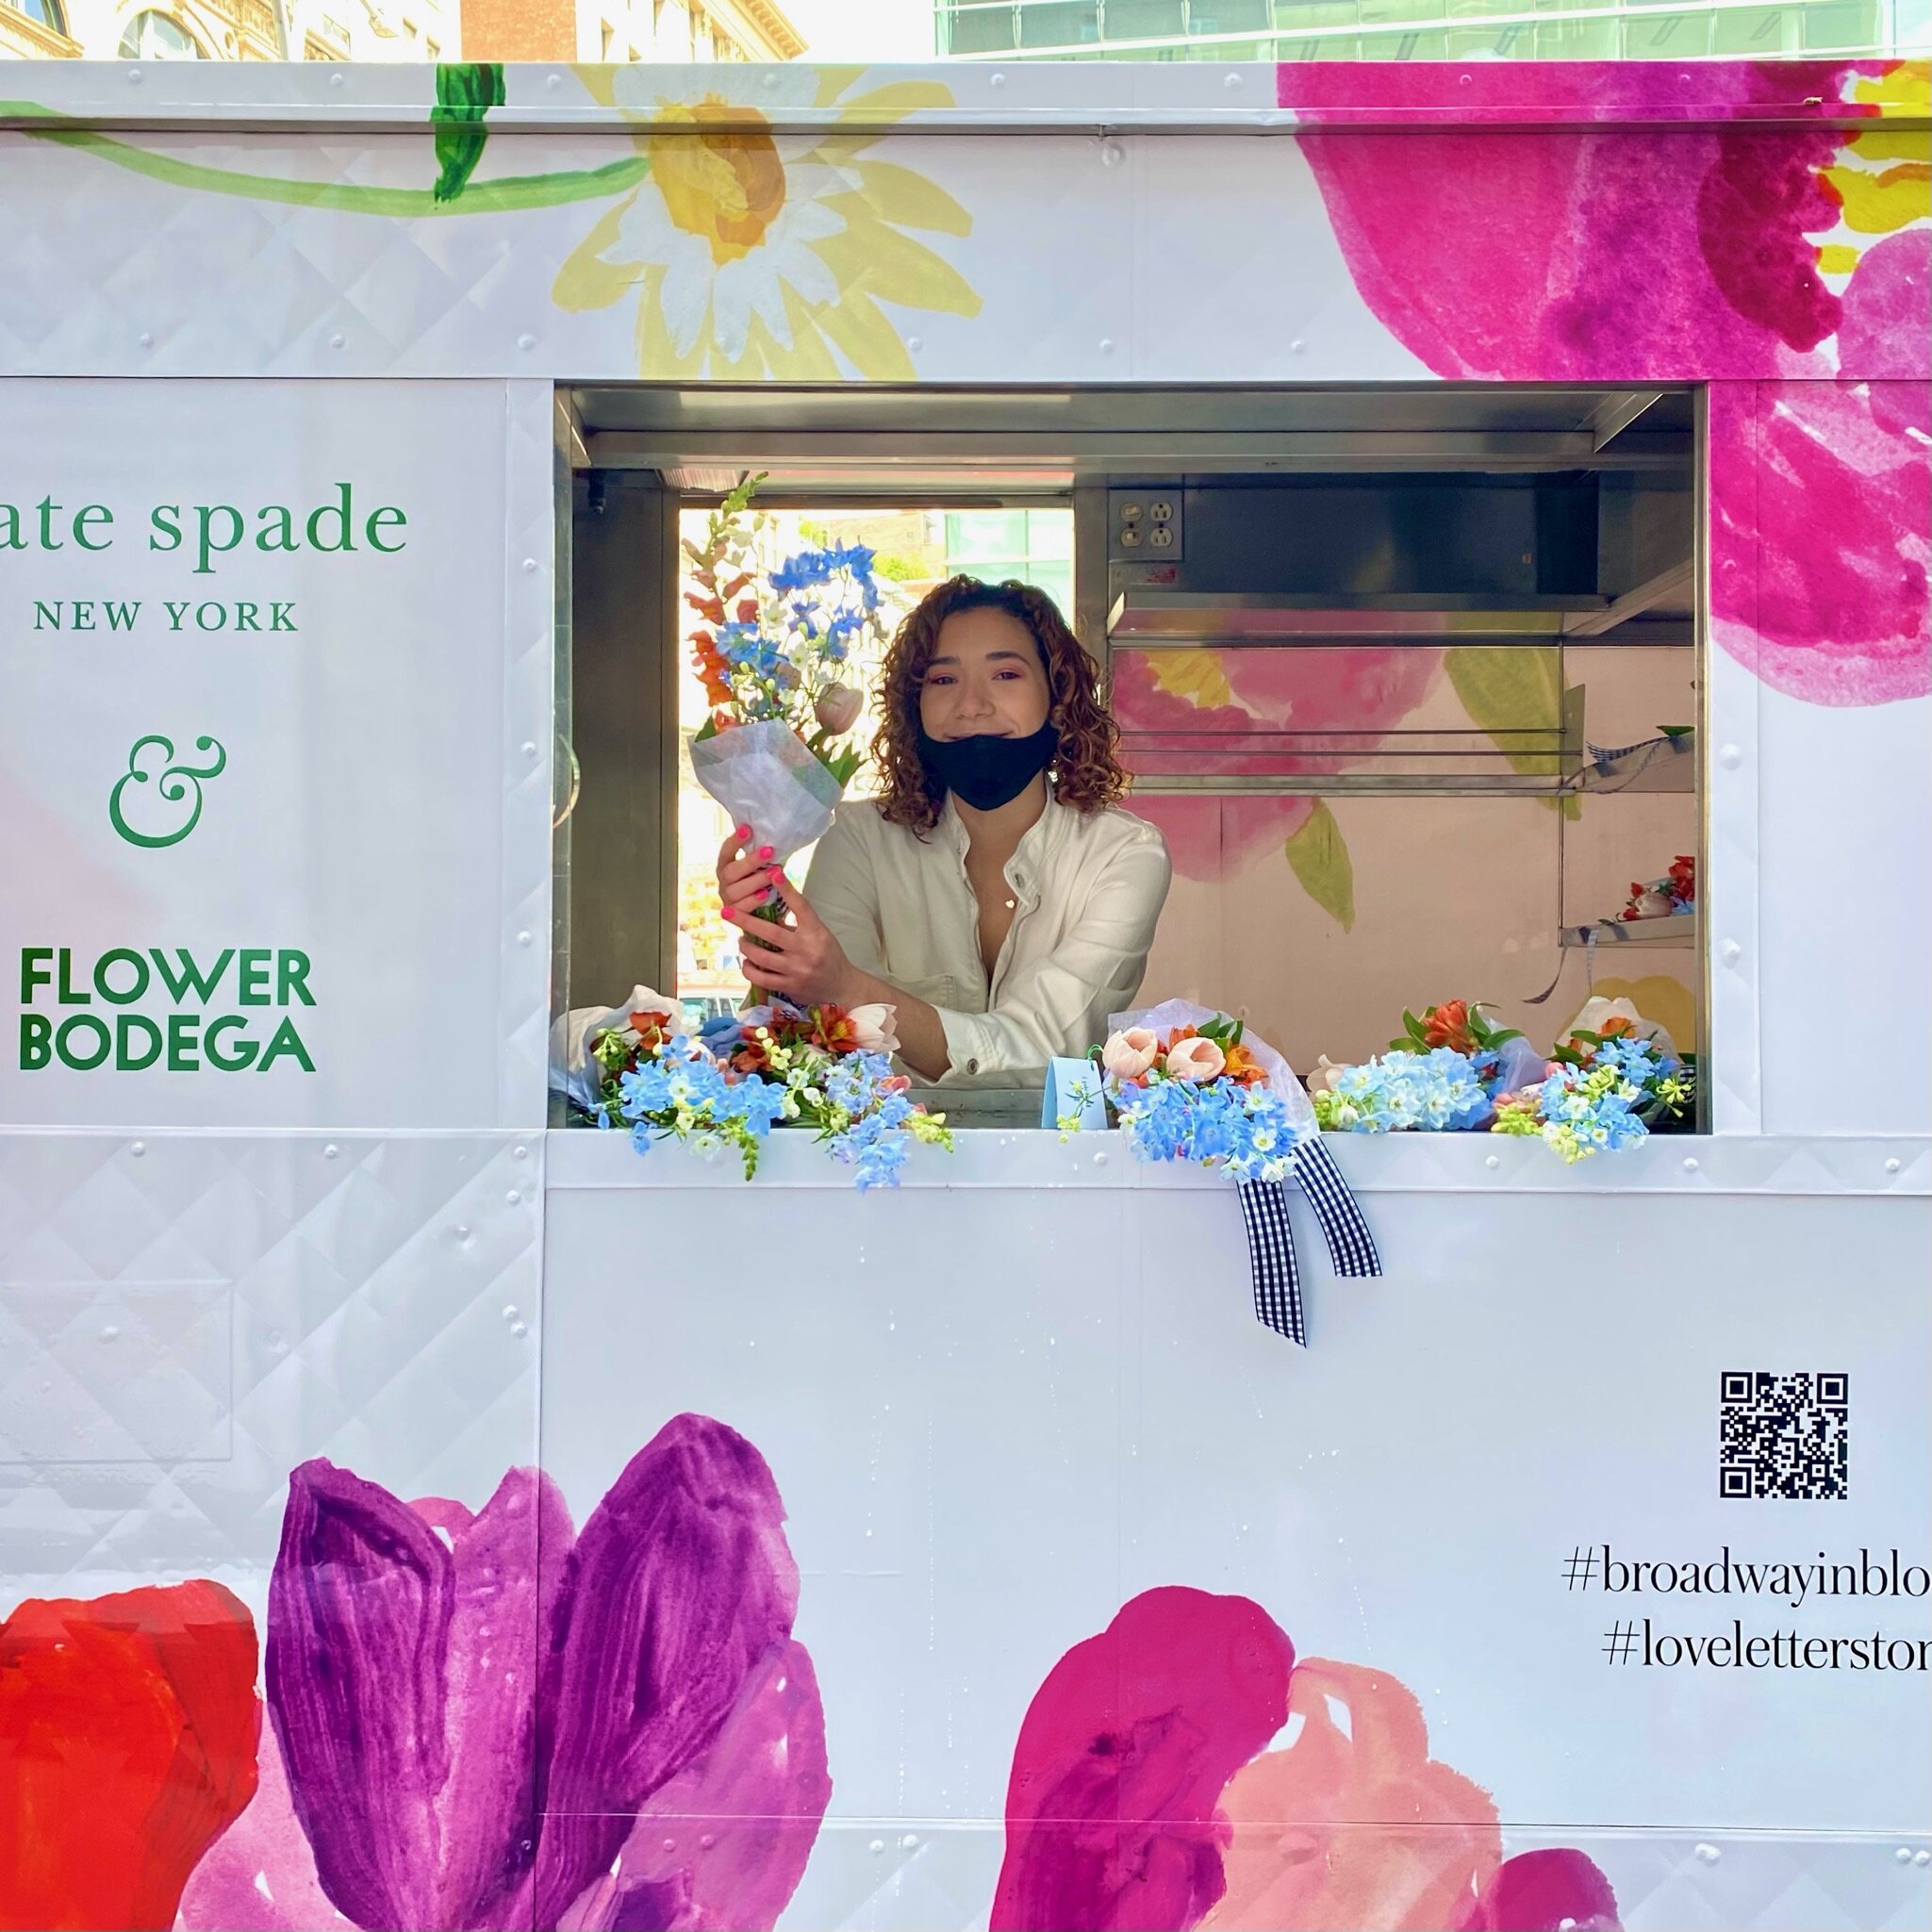 Kate Spade Broadway in Bloom, Mother's Day Event